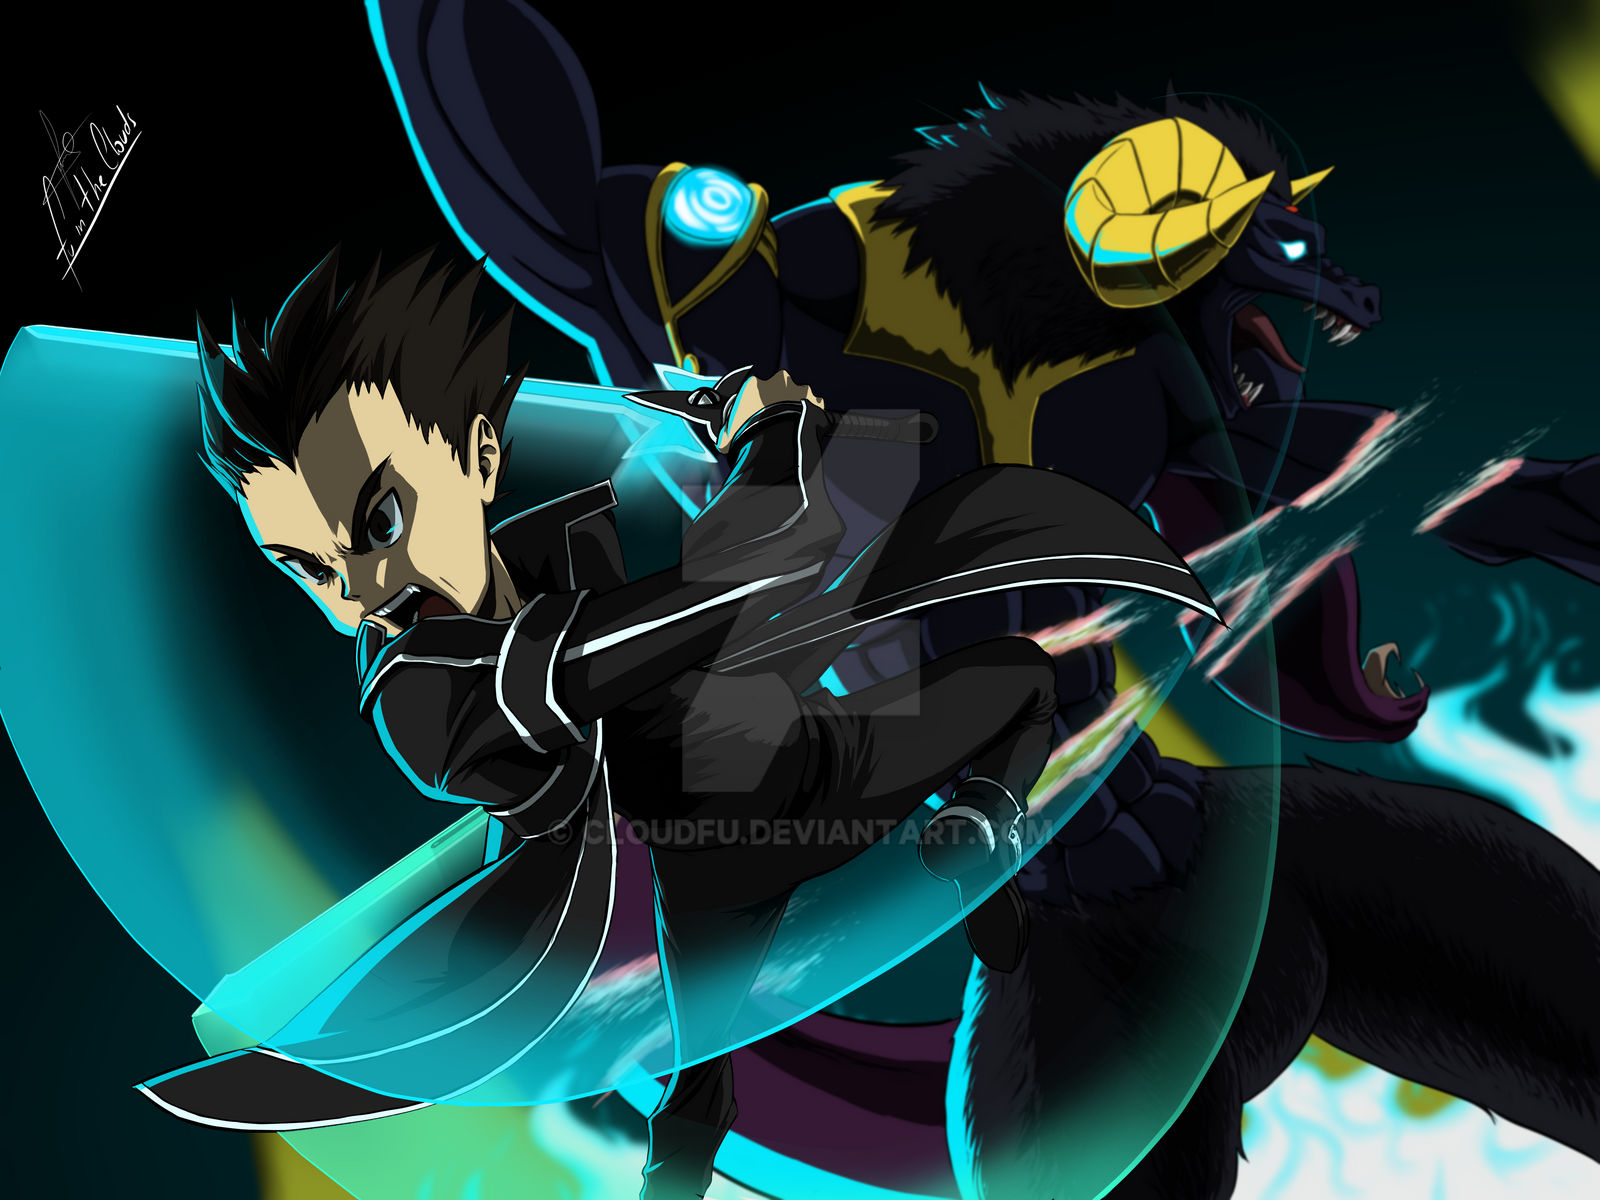 wafer Albany Missionær Battle With The 74th Floor Boss - Sword Art Online by CloudFu on DeviantArt